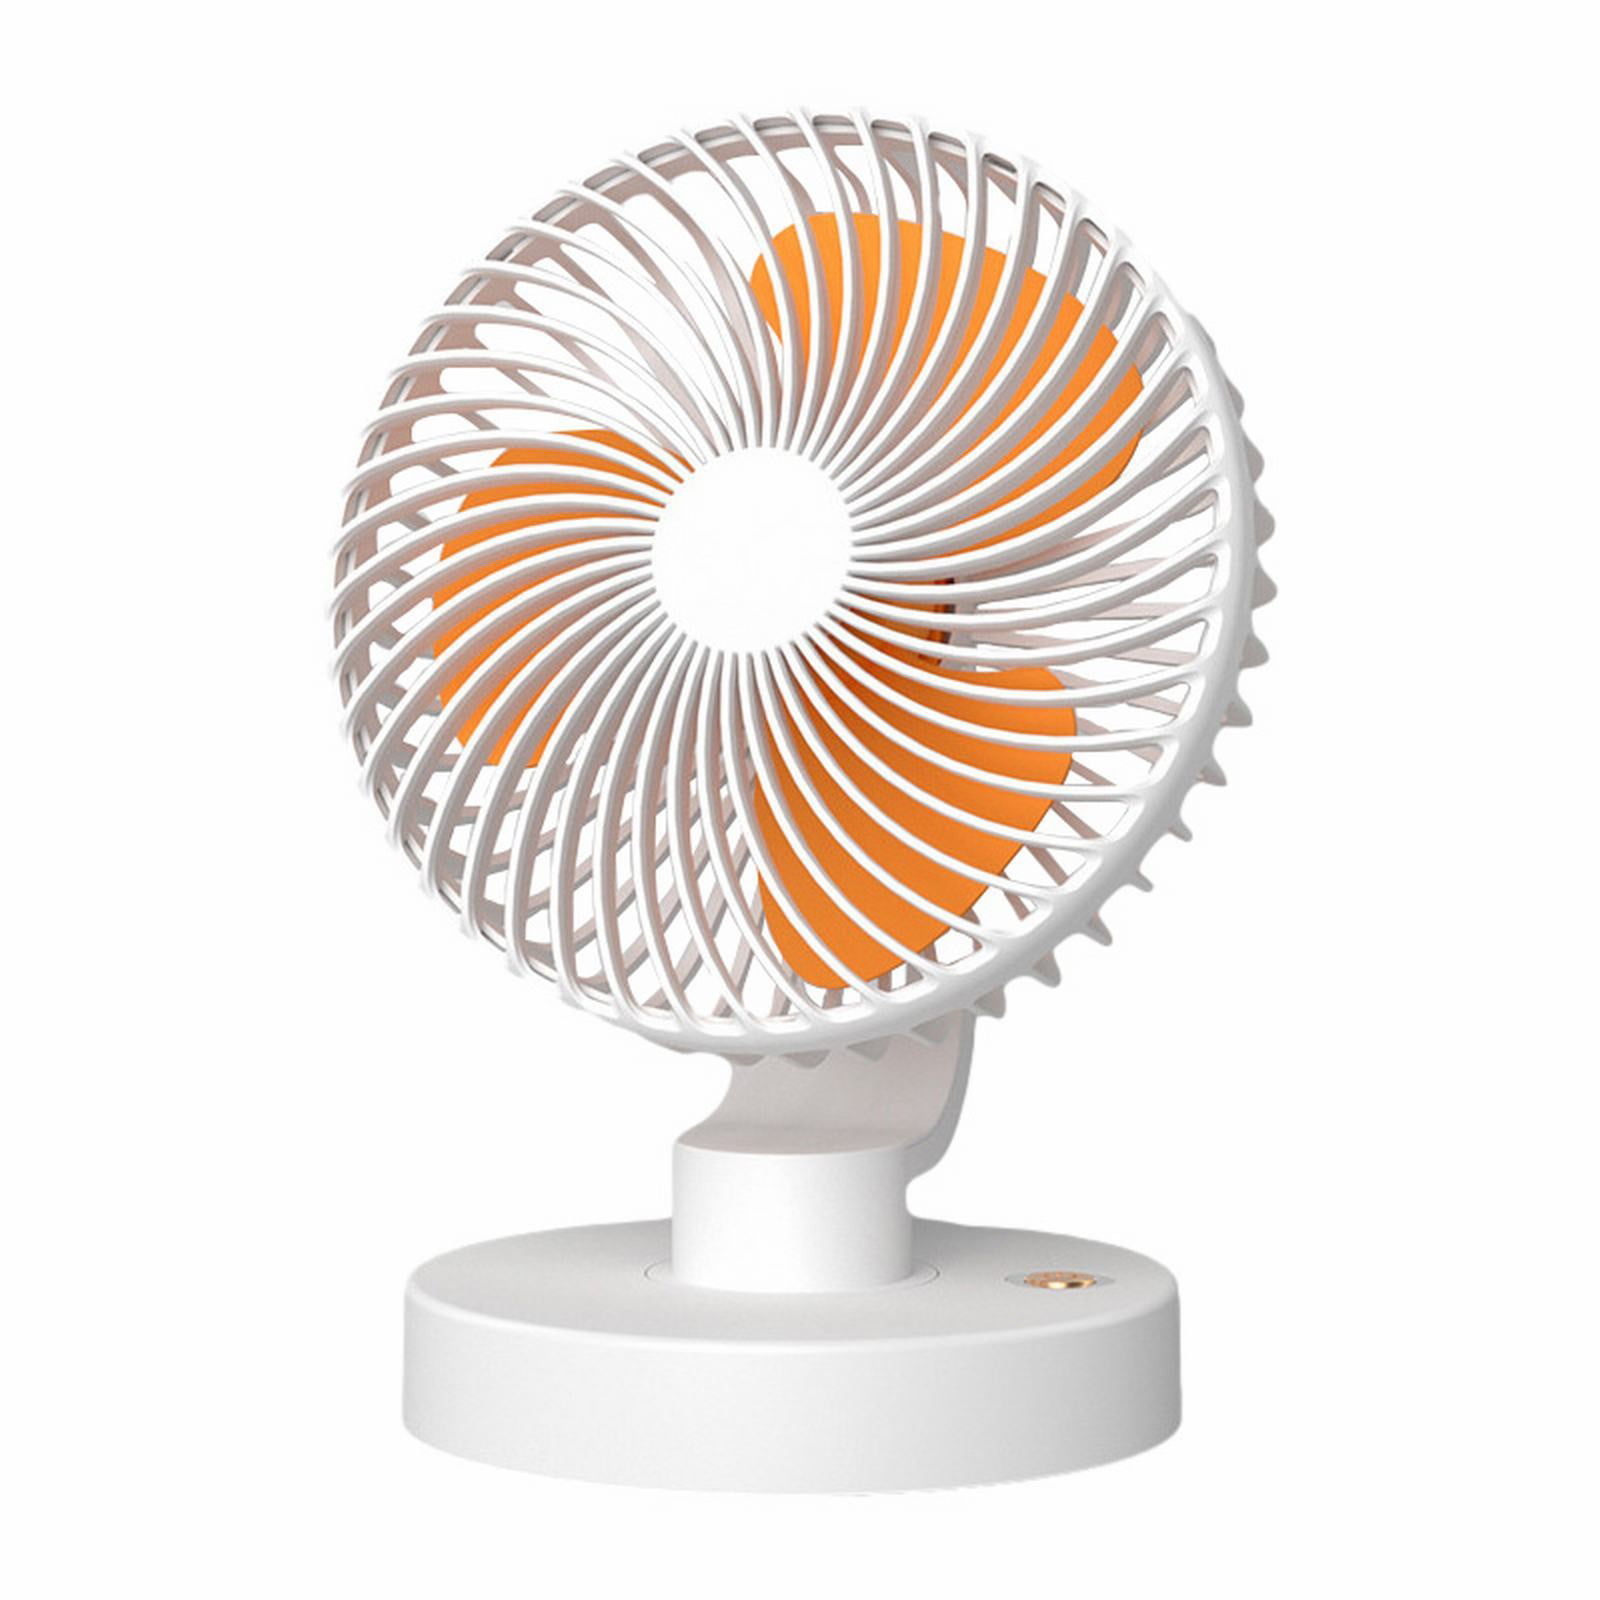 Anzai Tak for din hjælp Juster Fans For Home,Powerful Fan,White - Walmart.com